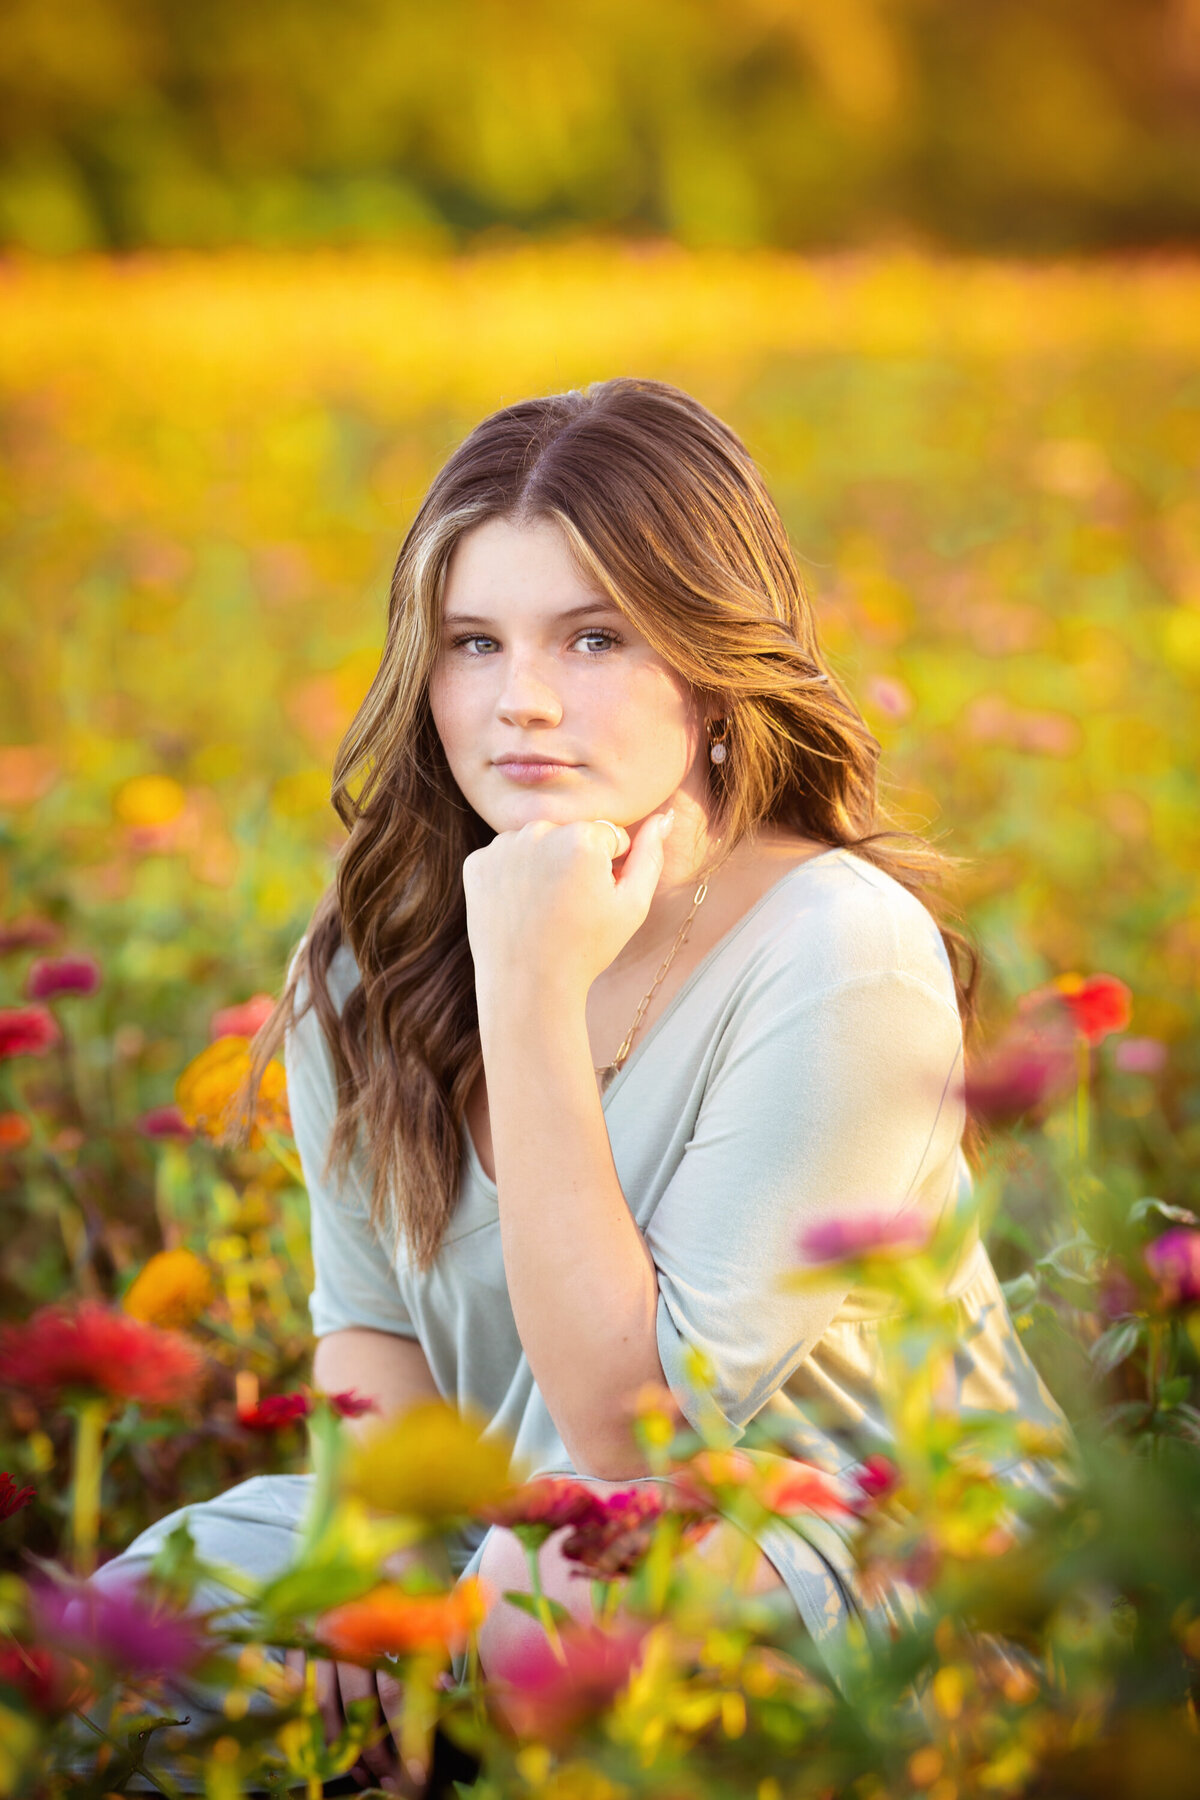 Senior girl with long brown hair crouched down in a zinnia field.  The flowers are pink, orange, and yellow.  There is lots of sunlight behind her.  She is looking at the camera with one hand under her chin.